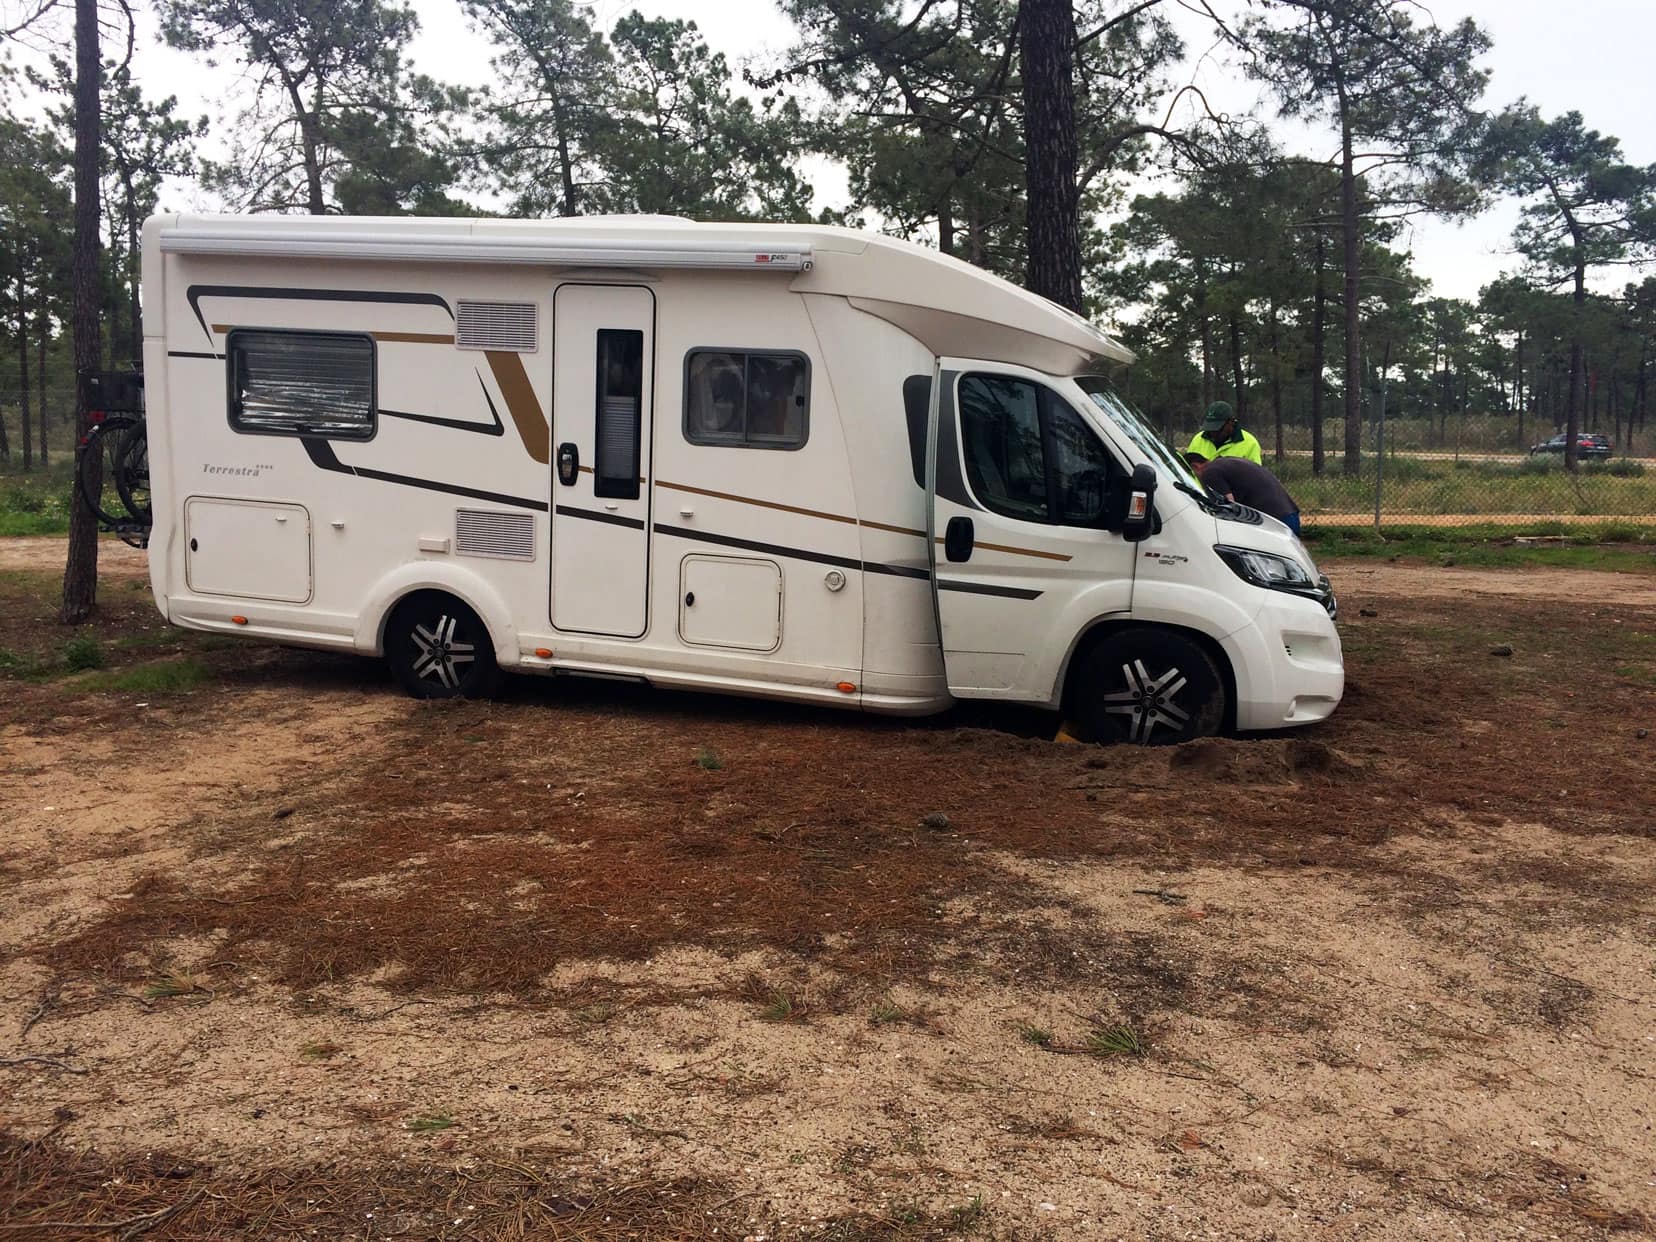 Campervanning in Portugal - Our bogged motorhome at Monte Gordo campsite